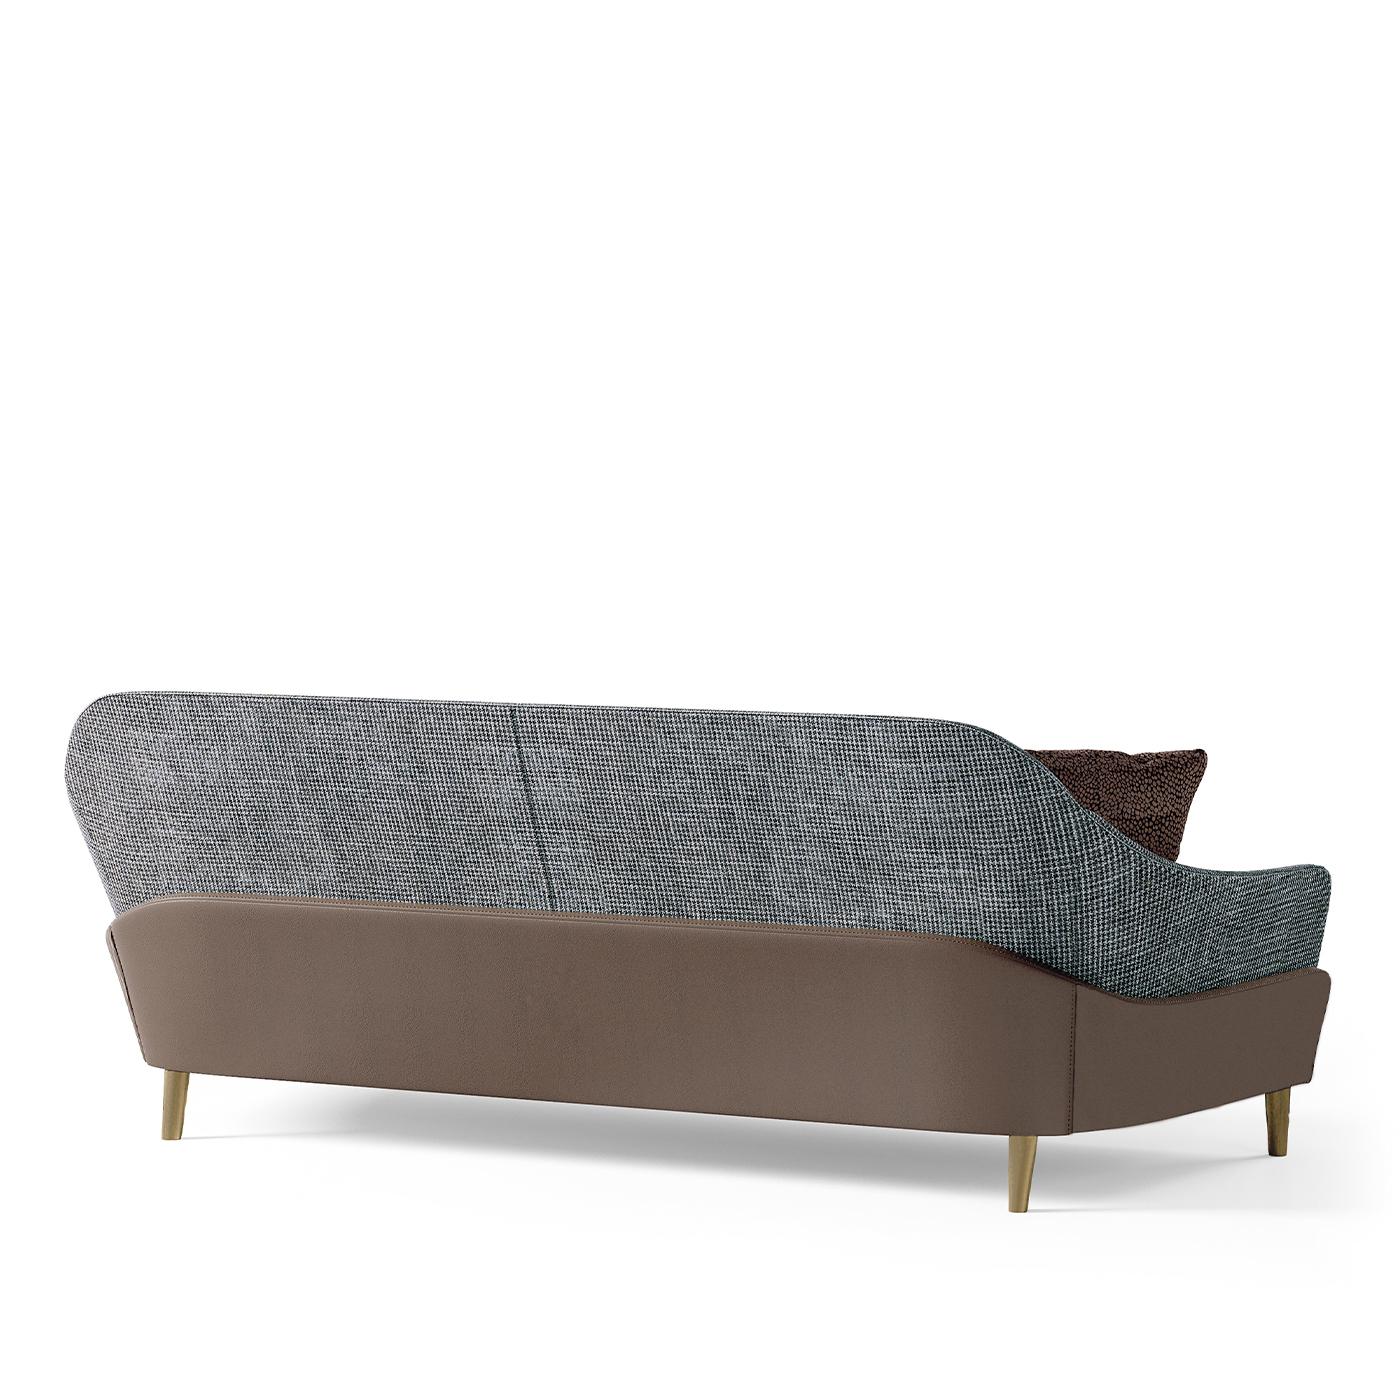 Effortlessly complementing any modern interior thanks to its timeless charm, this sofa will become the focal point of any living room or conversational area. Resting on four slanted painted metal feet, it features a solid beech and poplar plywood